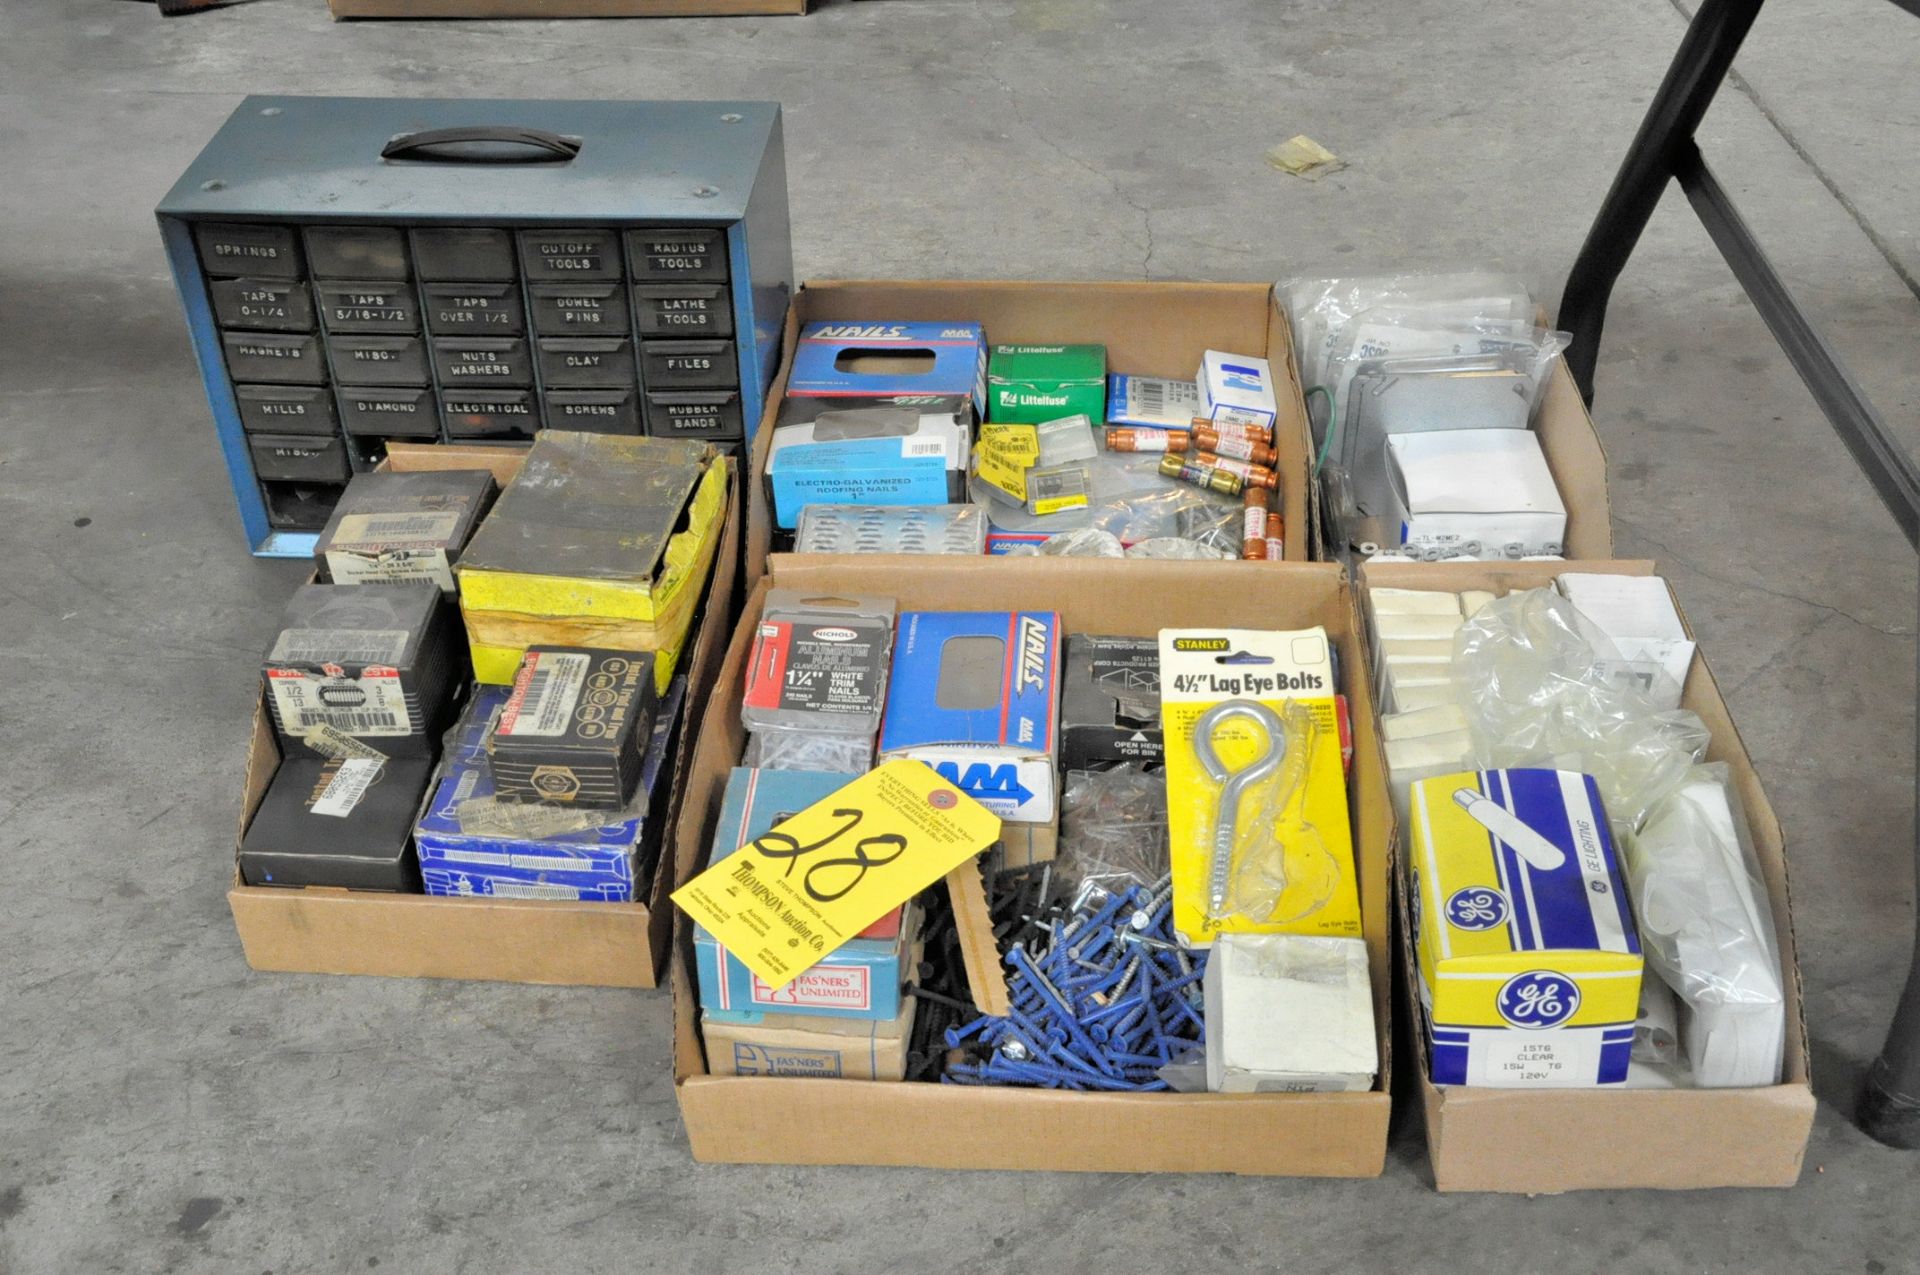 Lot-Screws, Nails, Light Bulbs, Fuses, Hardware, Misc. Electrical in (5) Boxes with Organizer